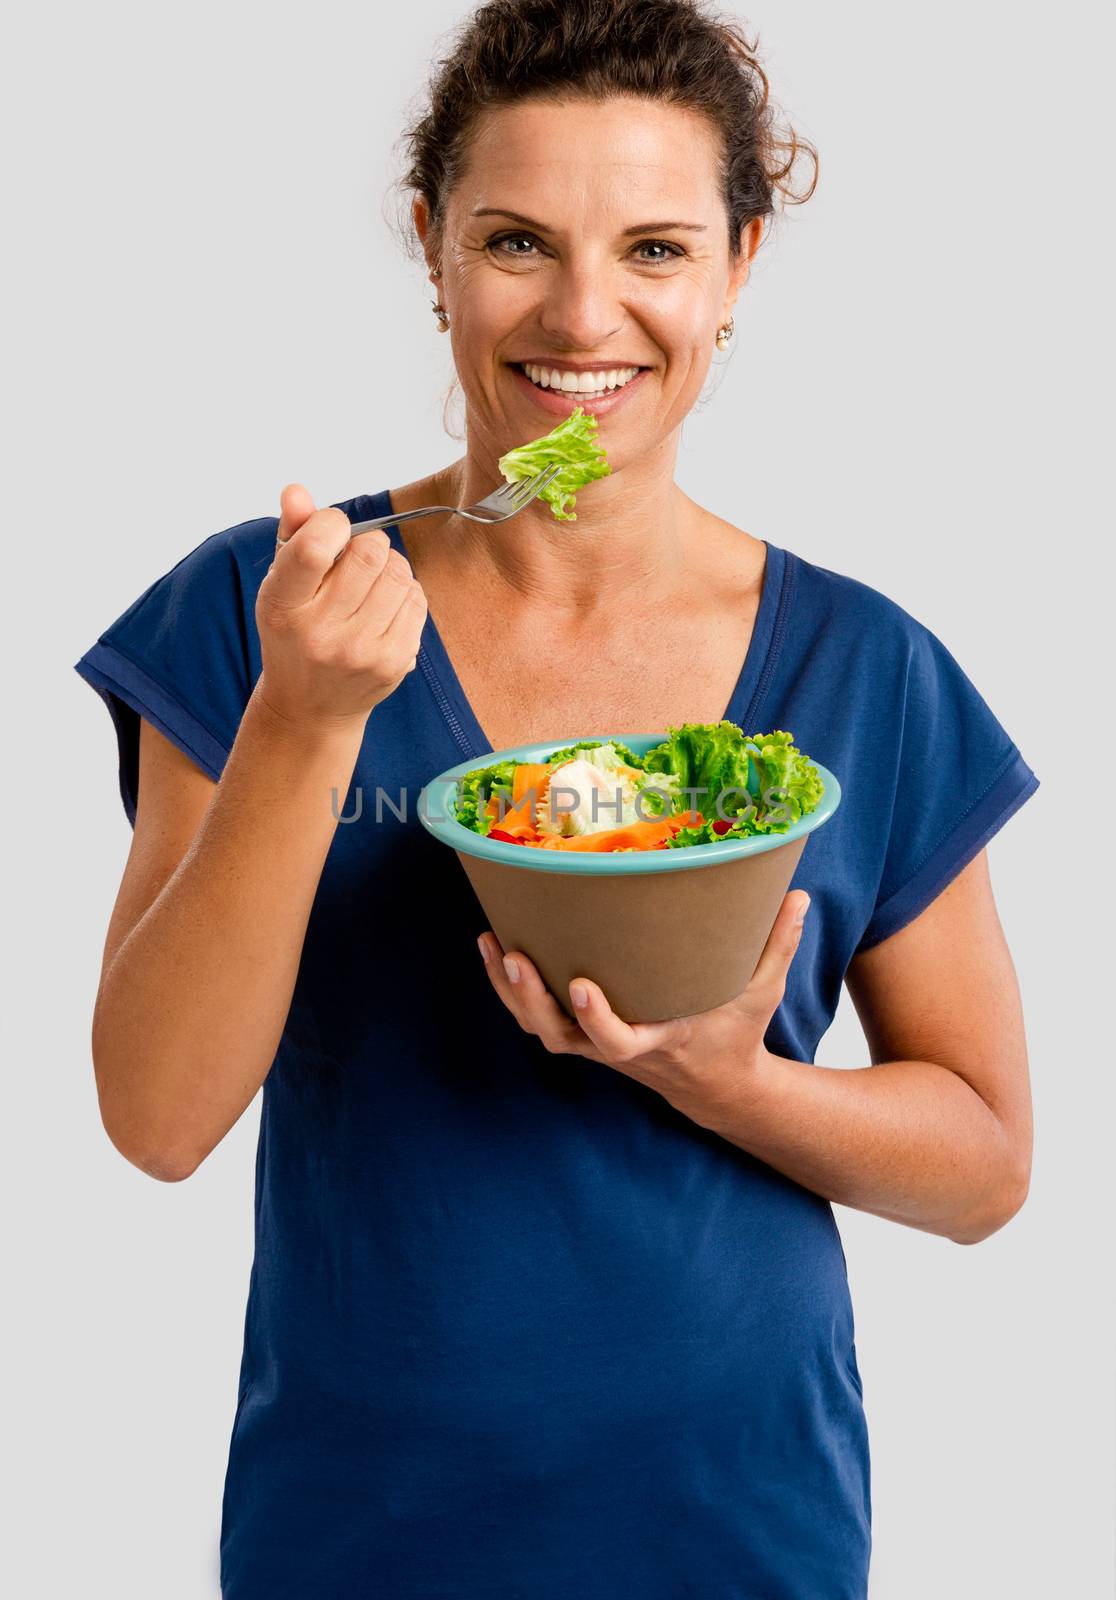 Portrait of a middle aged woman eating a healthy salade